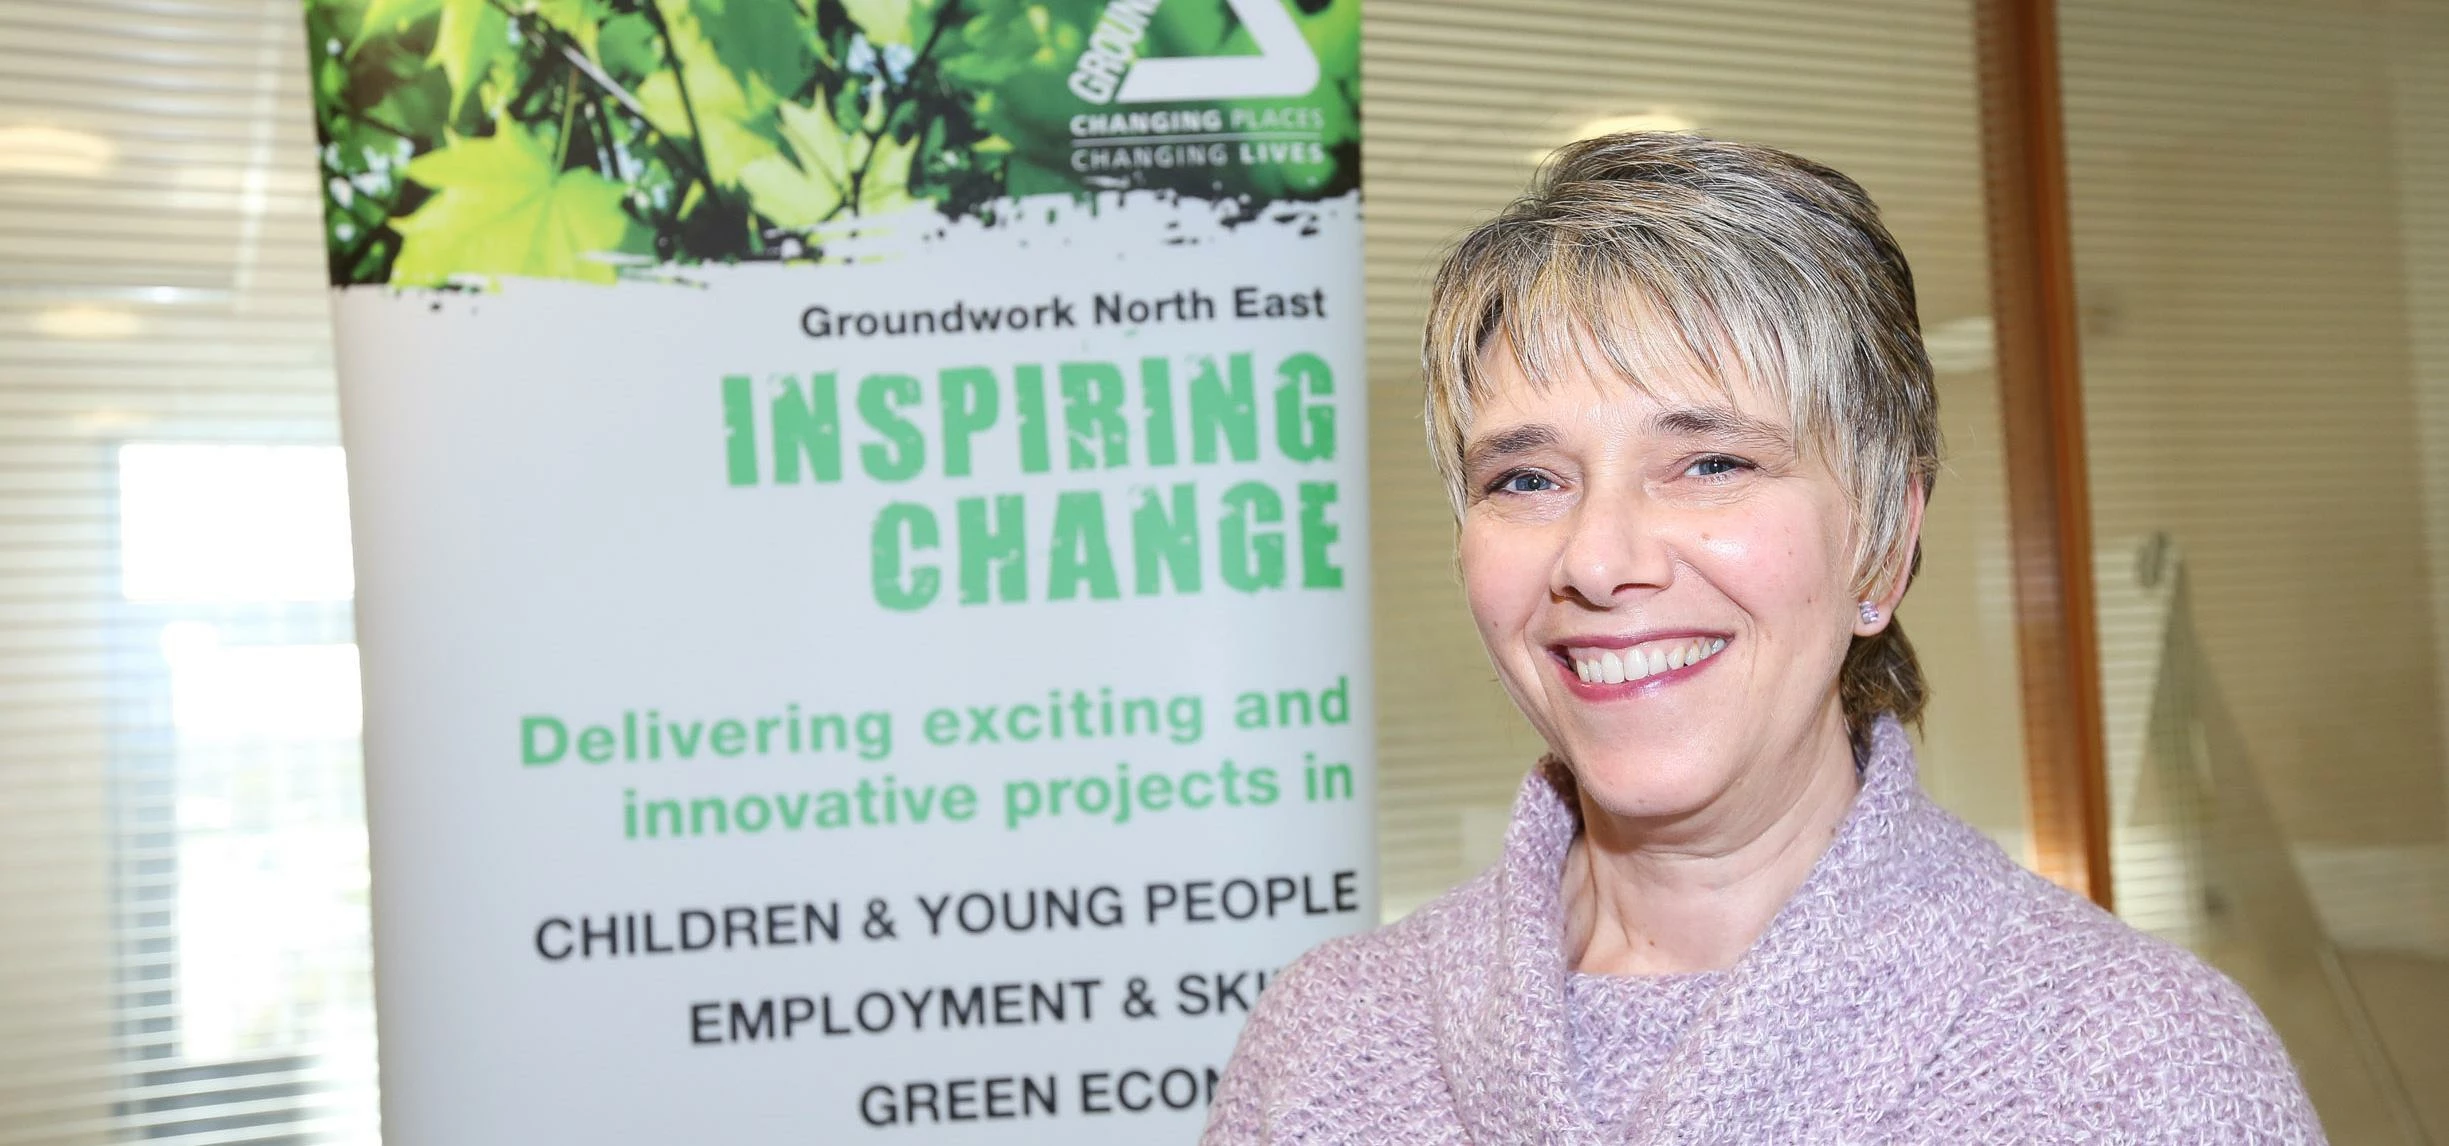 Michele Armstrong, Groundwork NE & Cumbria Partnership Manager